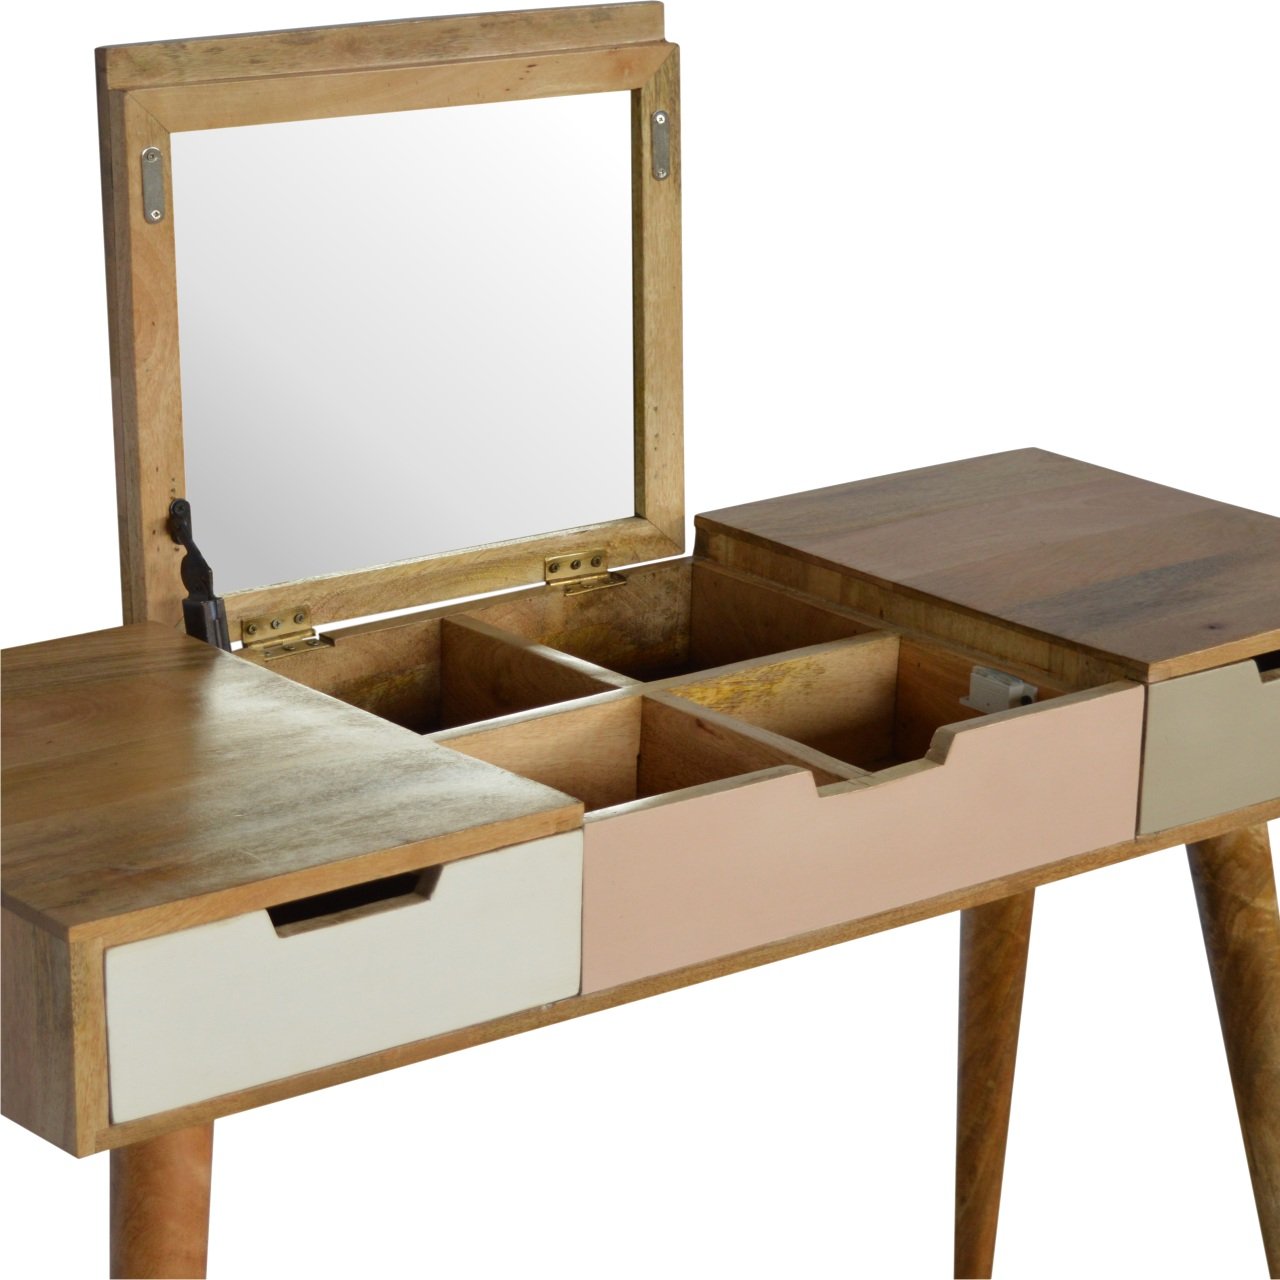 Blush Pink Dressing Table with Foldable Mirror - mancavesuperstore